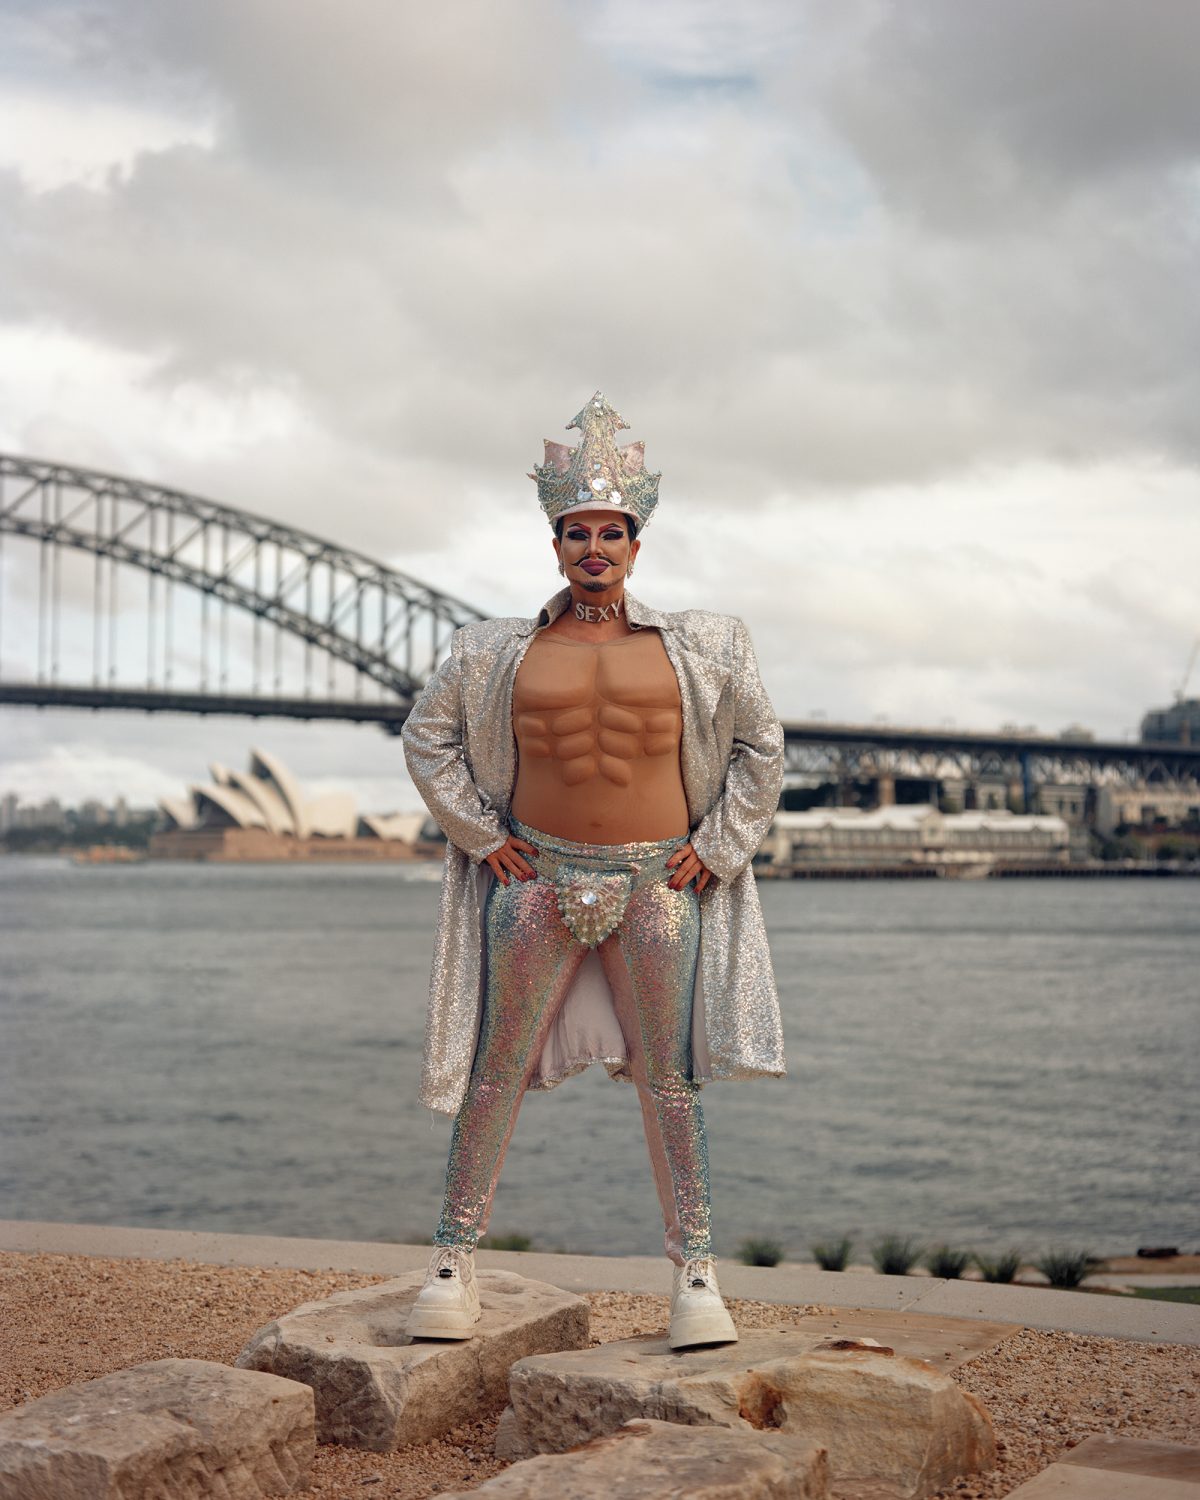 A person standing in a glittery, draggy outfit and chestpiece in front of the Sydney Harbour Bridge.